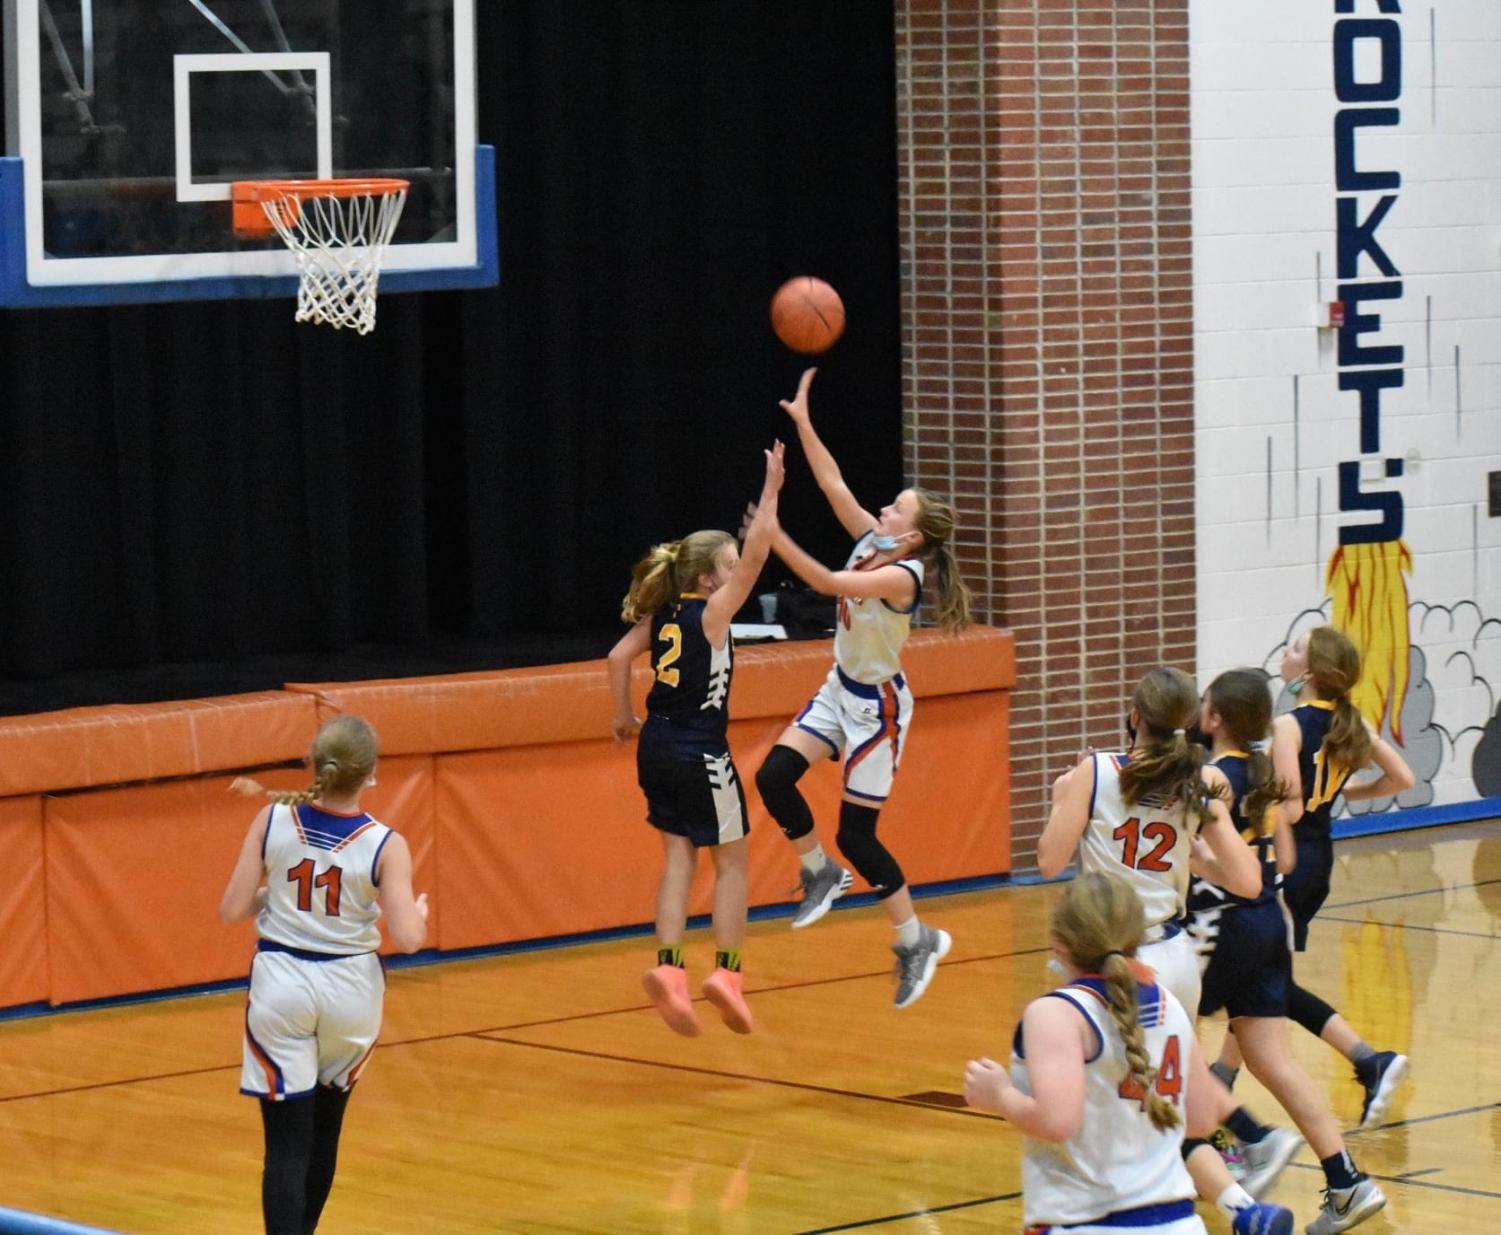 A Rough Week for the Jr. Lady Rockets